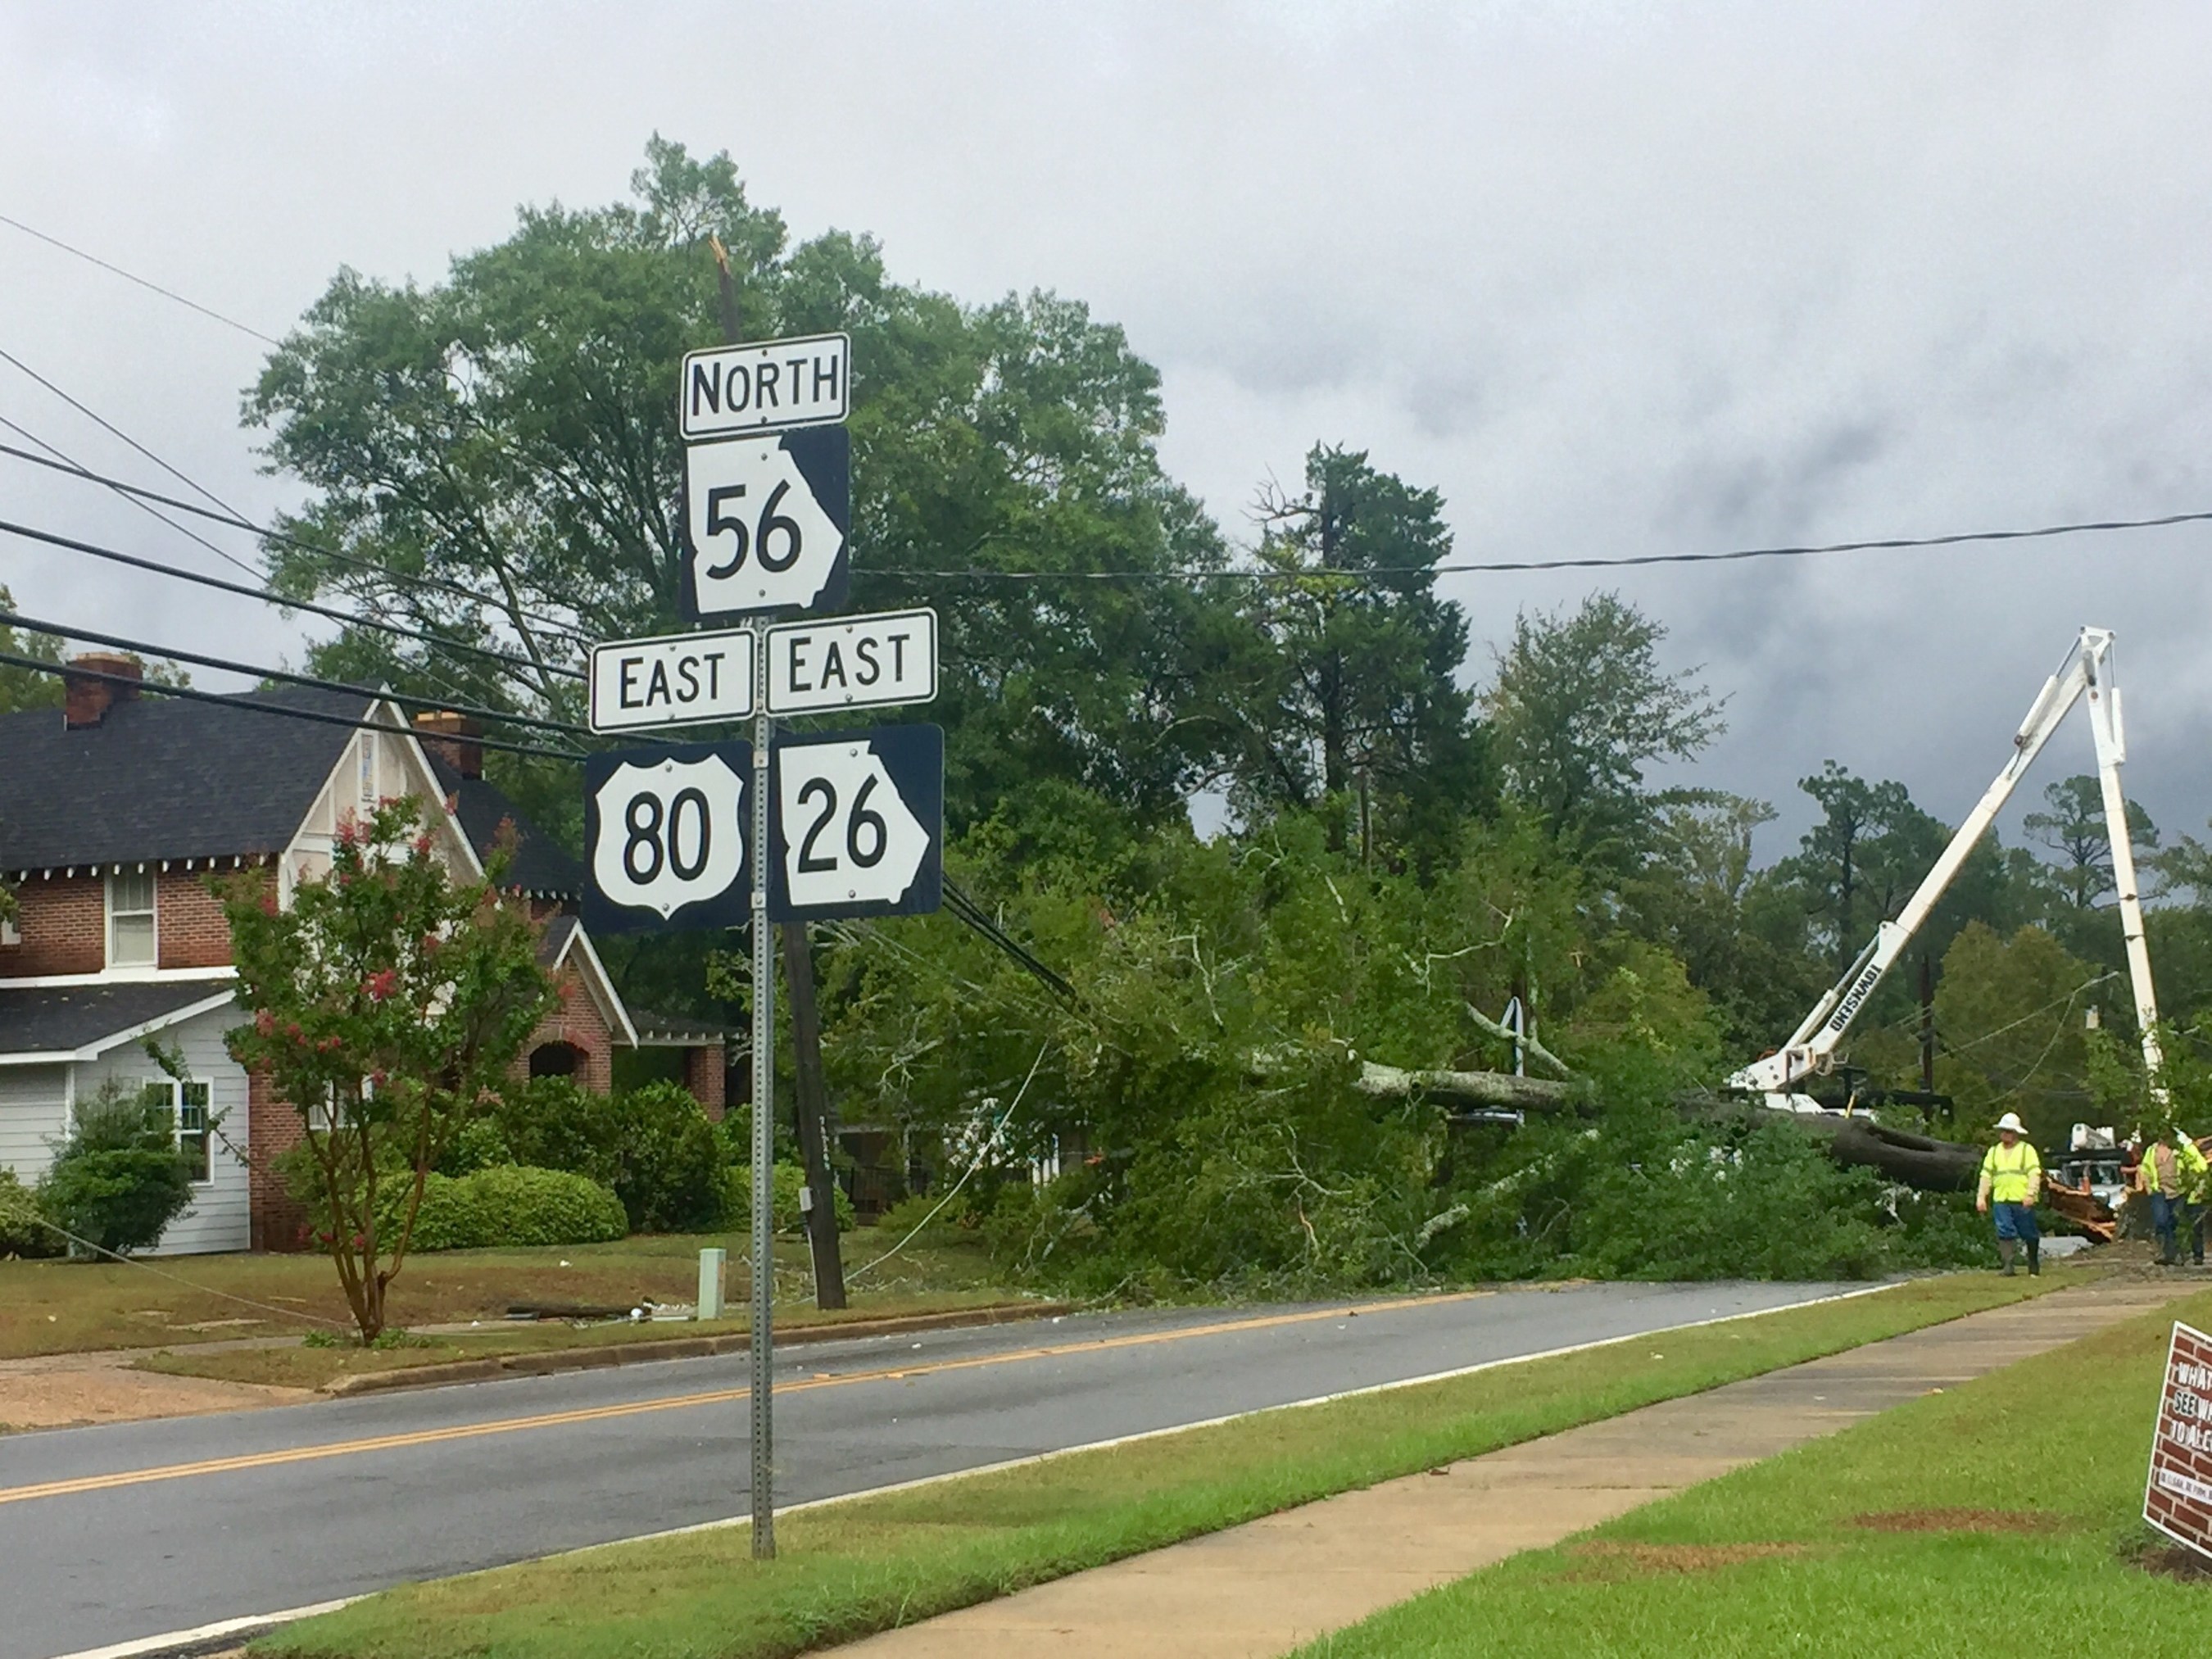 Large trees caused extensive damage in South and Coastal Georgia during Tropical Storm Hermine. Georgia Power crews work to restore service to thousands and quickly and safely as possible.